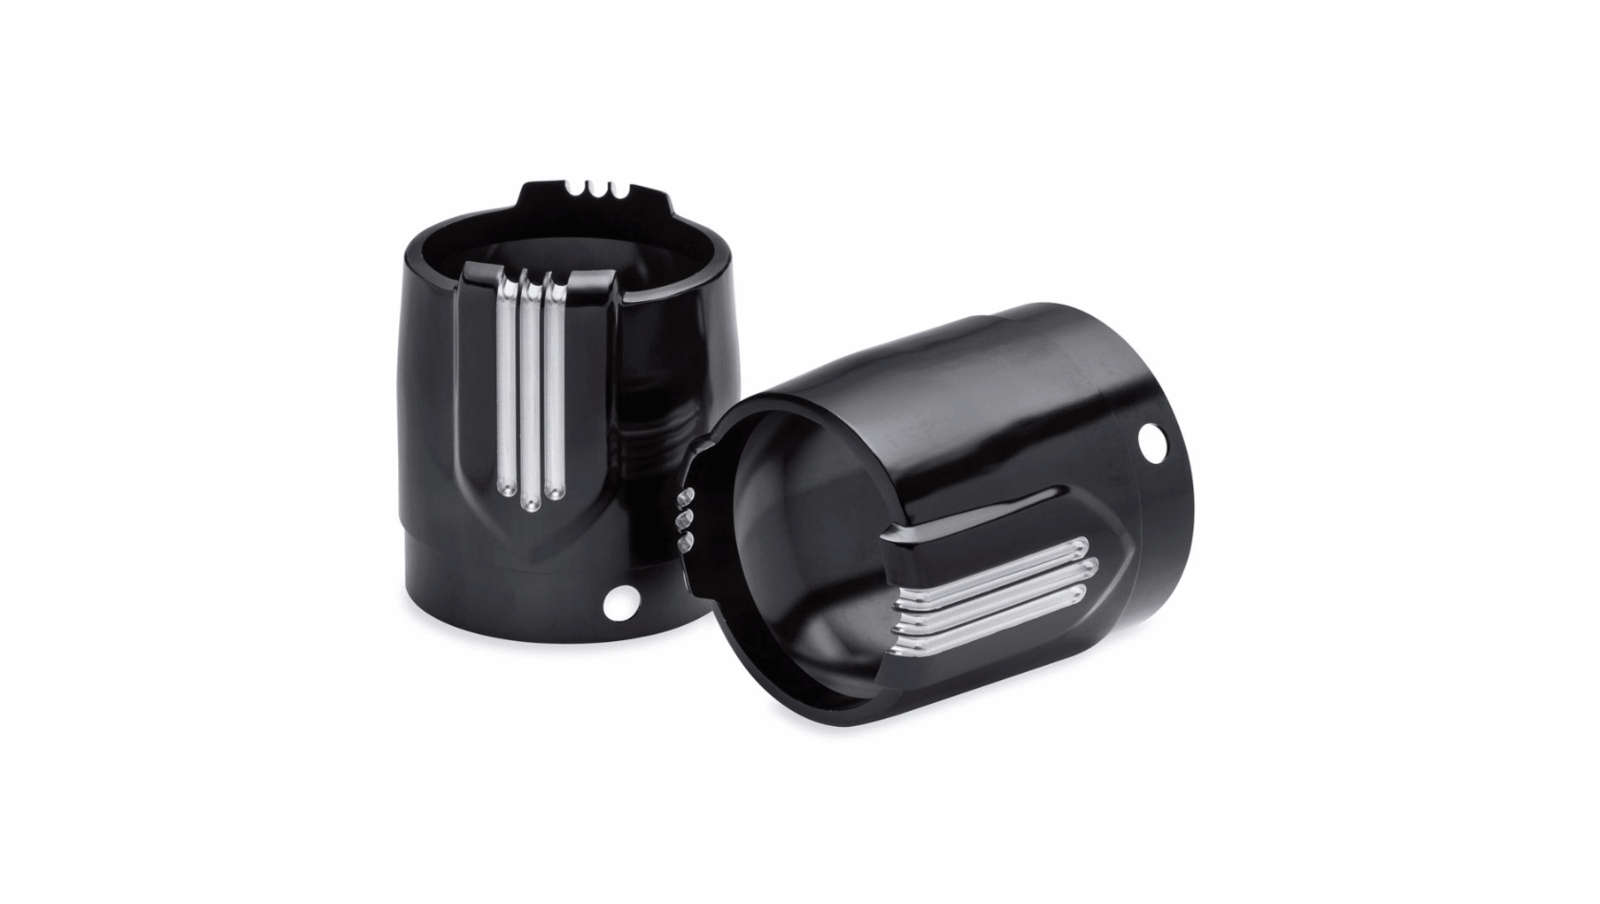 65100097Defiance Collection Muffler End Cap Kit - 4.5" - Gloss Black with Machine Cut